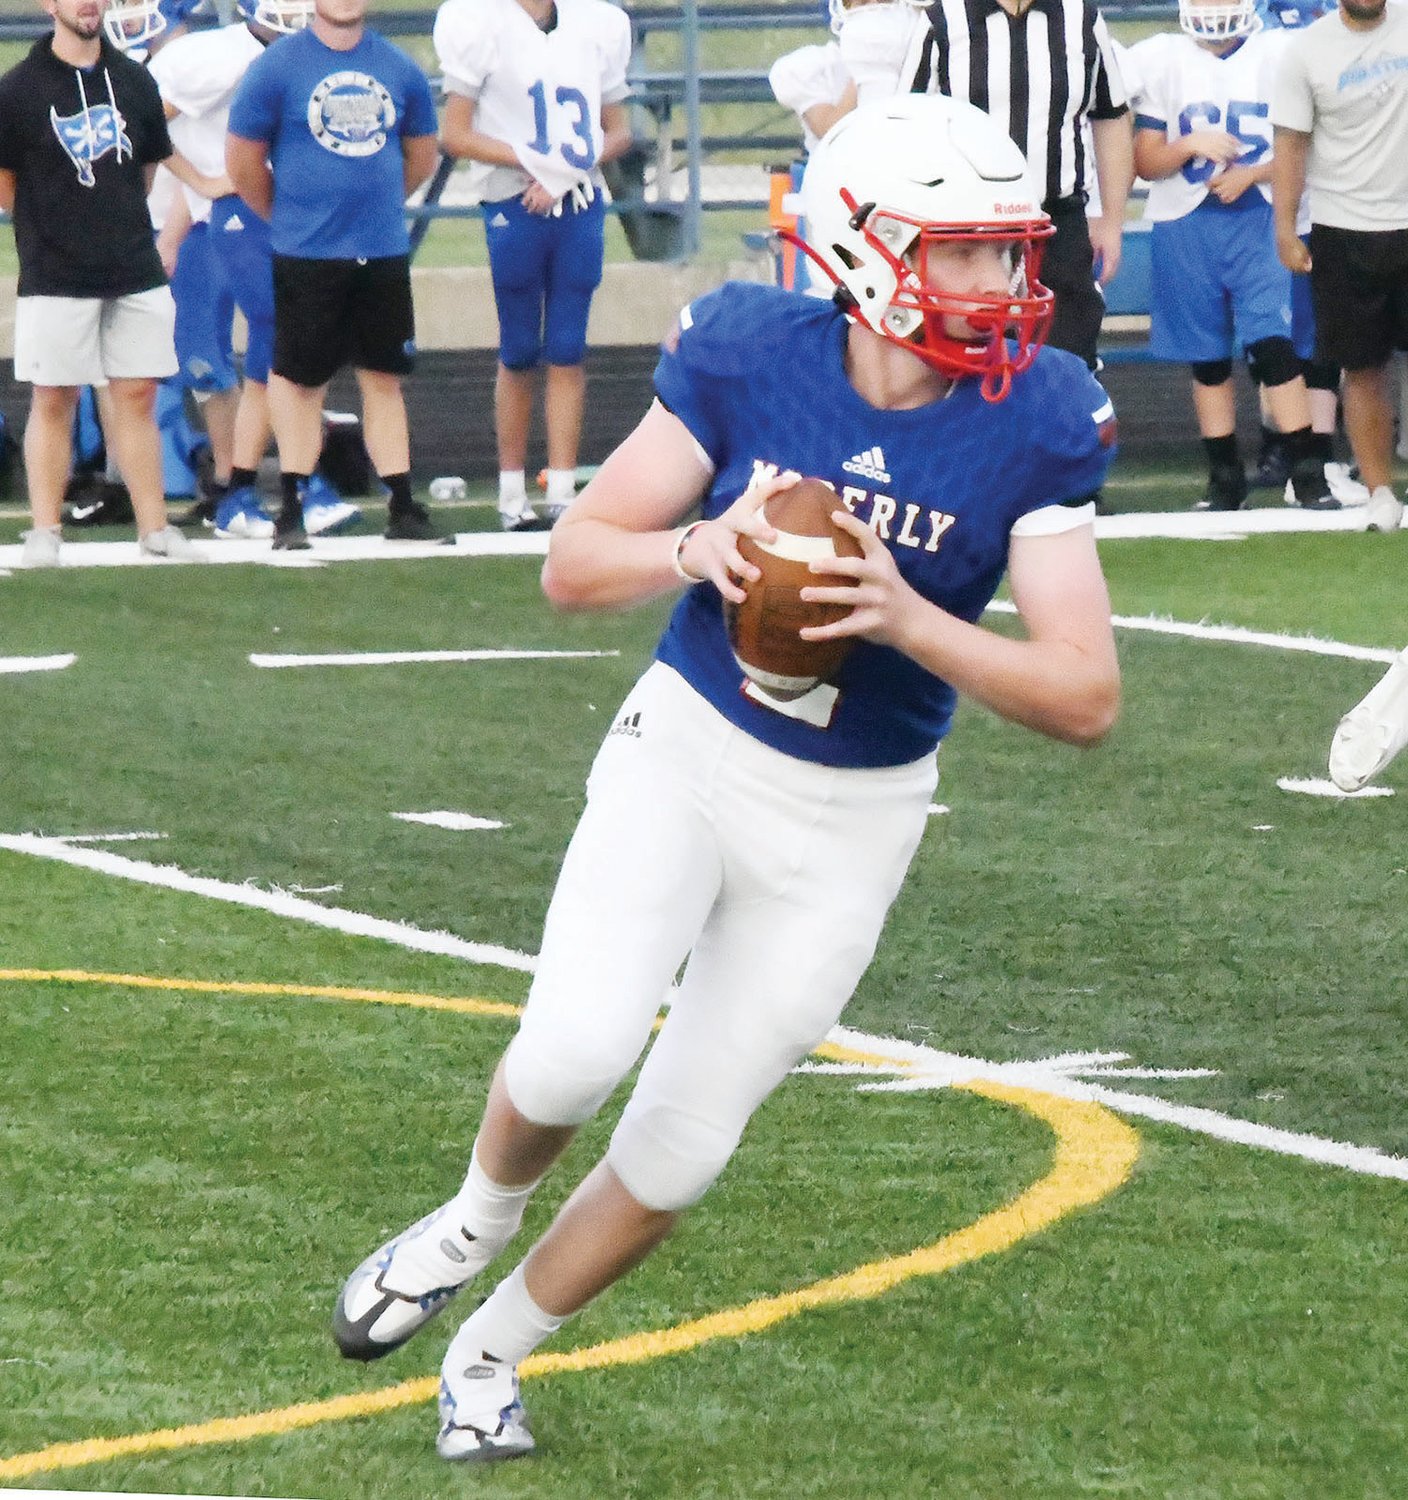 Moberly quarterback Jackson Engel rolls out to pass during the scrimmage.